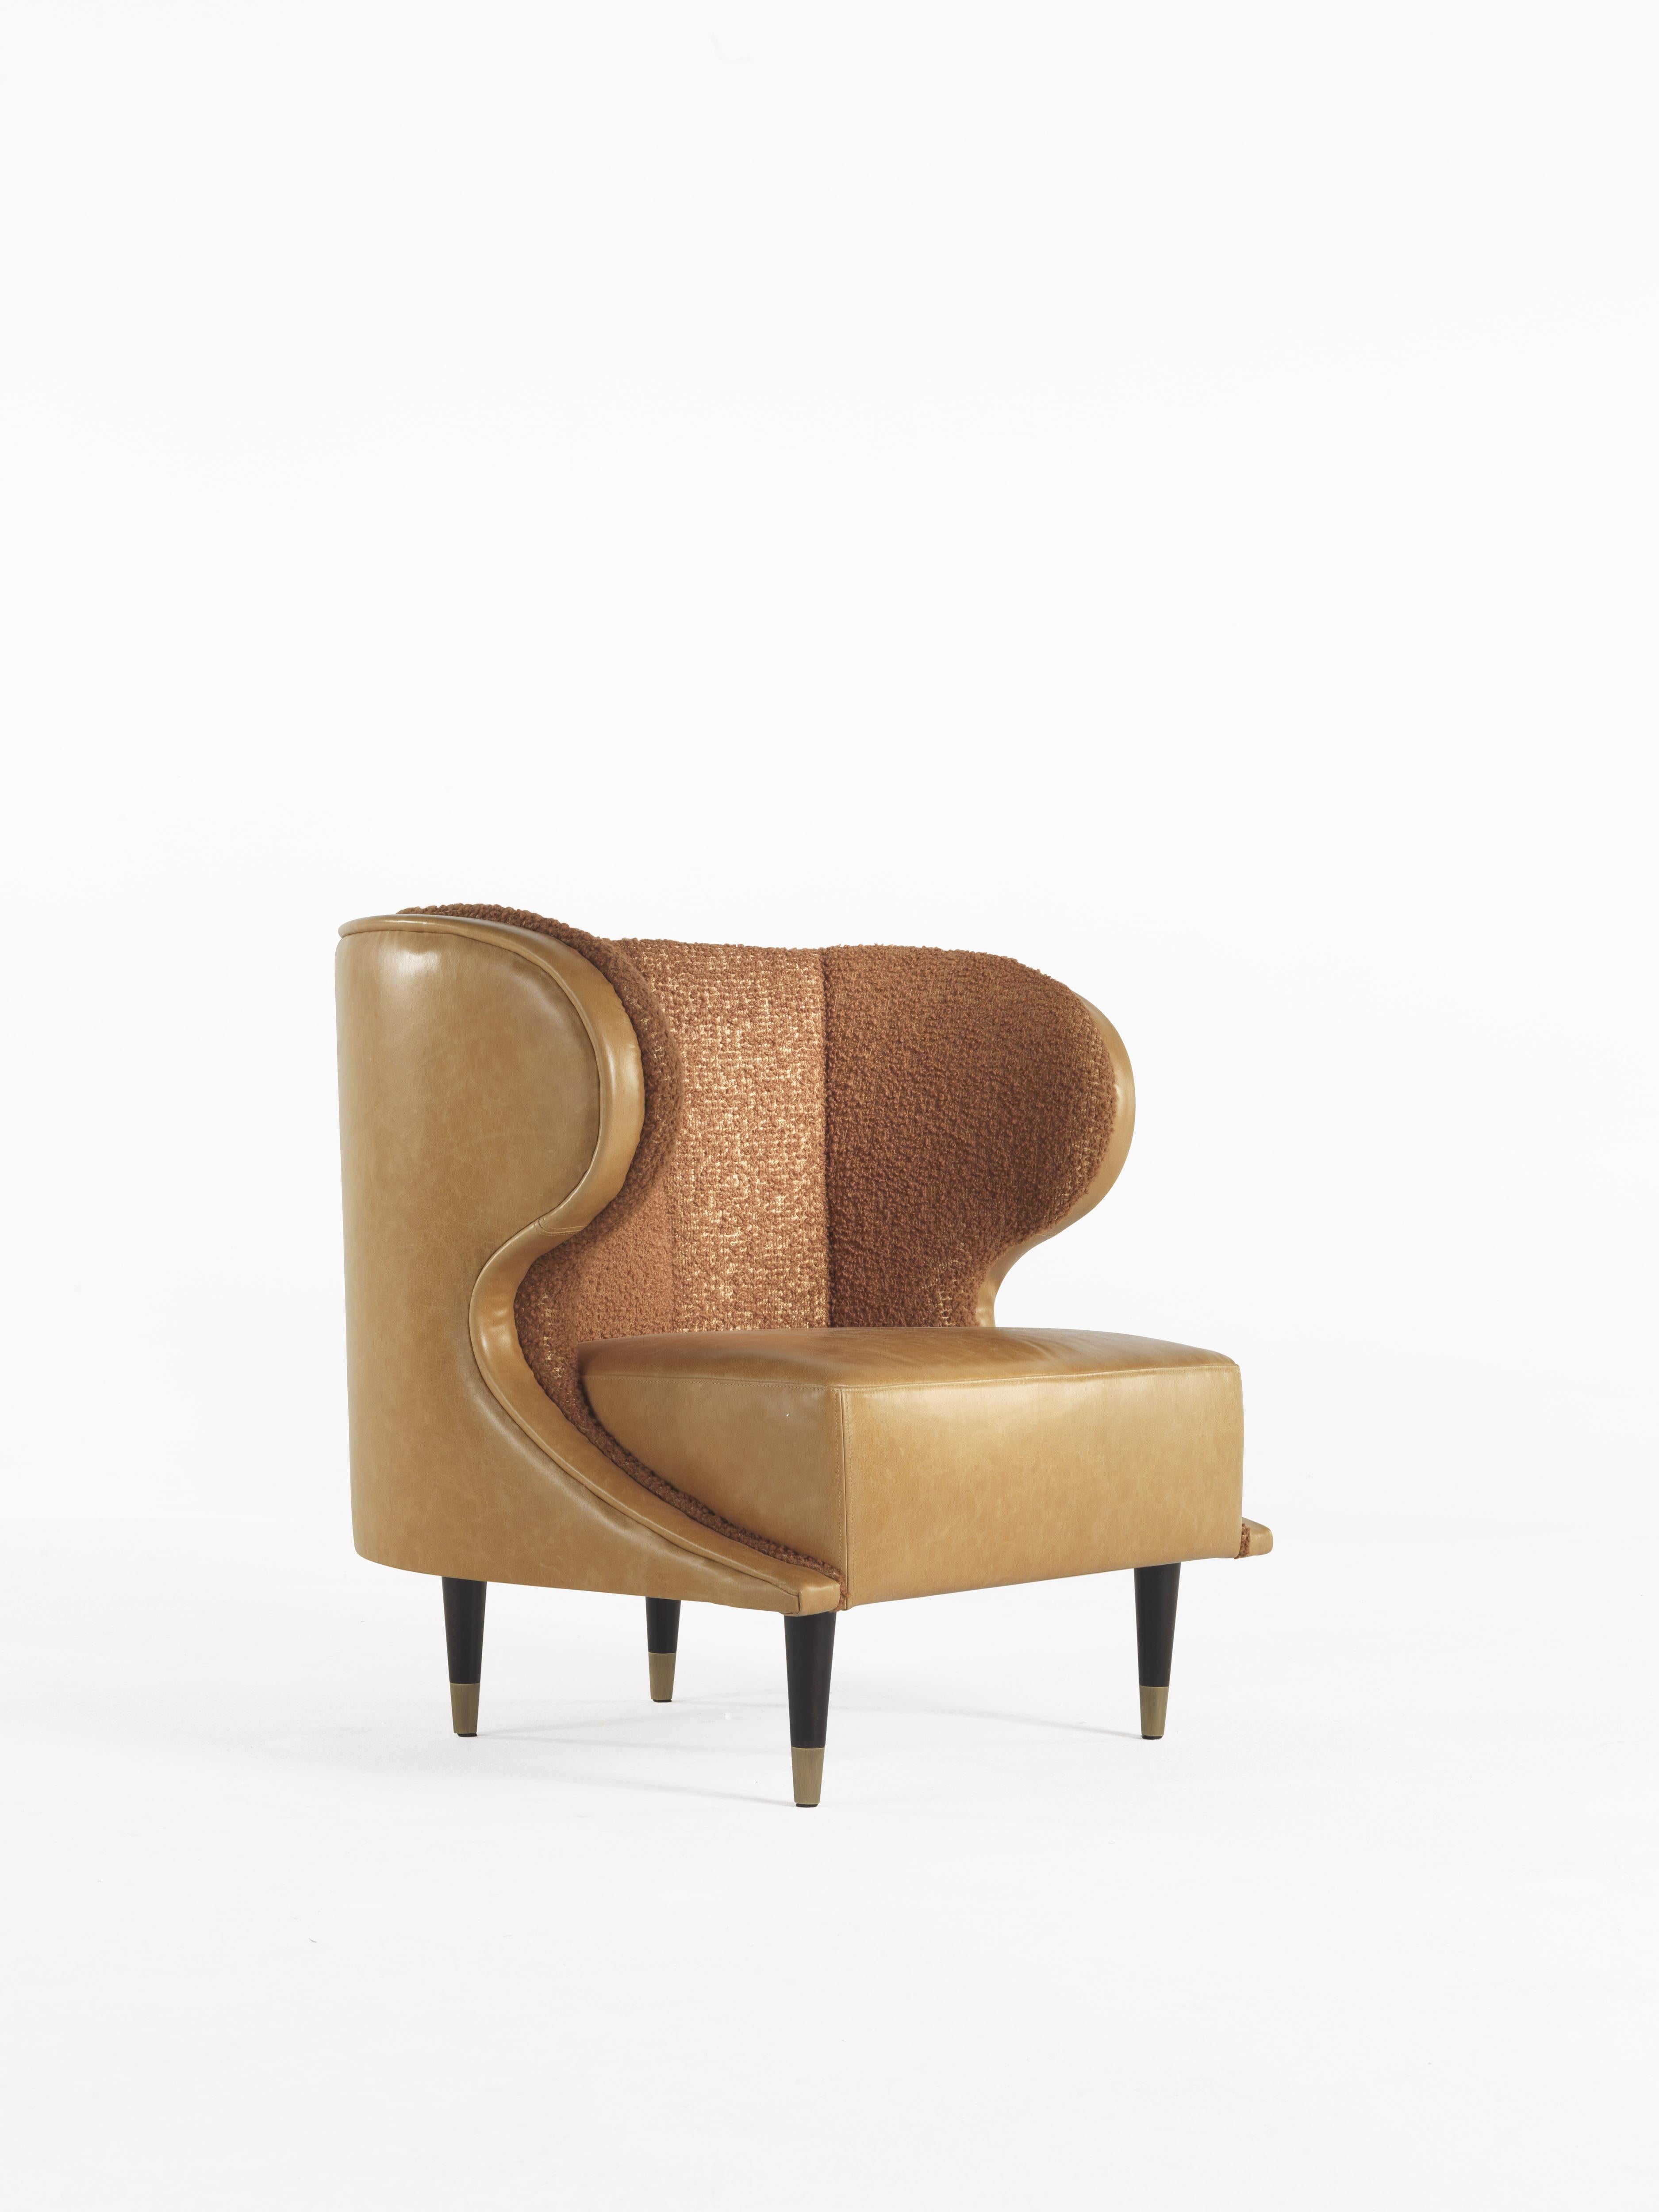 The midcentury charm meets comfort and design in this armchair designed for reading and relaxation, ideal for the sleeping area. Its soft lines and enveloping backrest recall in its shape a classic bergère but with the modern touch of the legs with